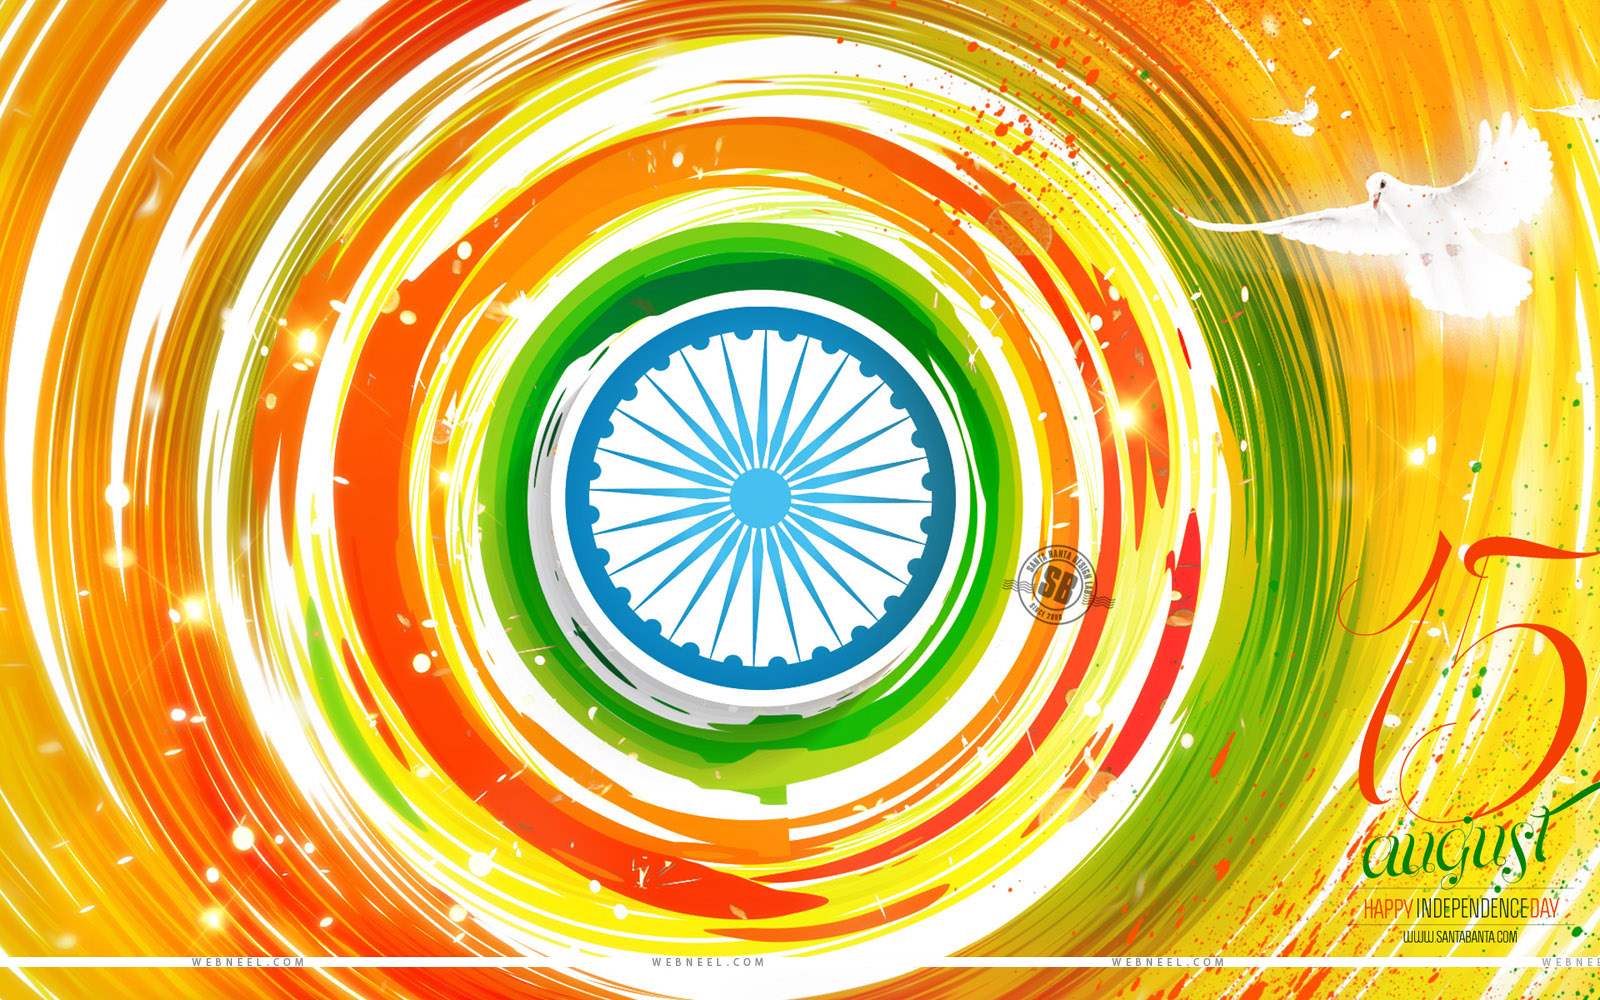  independence day india independence day hd wallpapers 2015 and